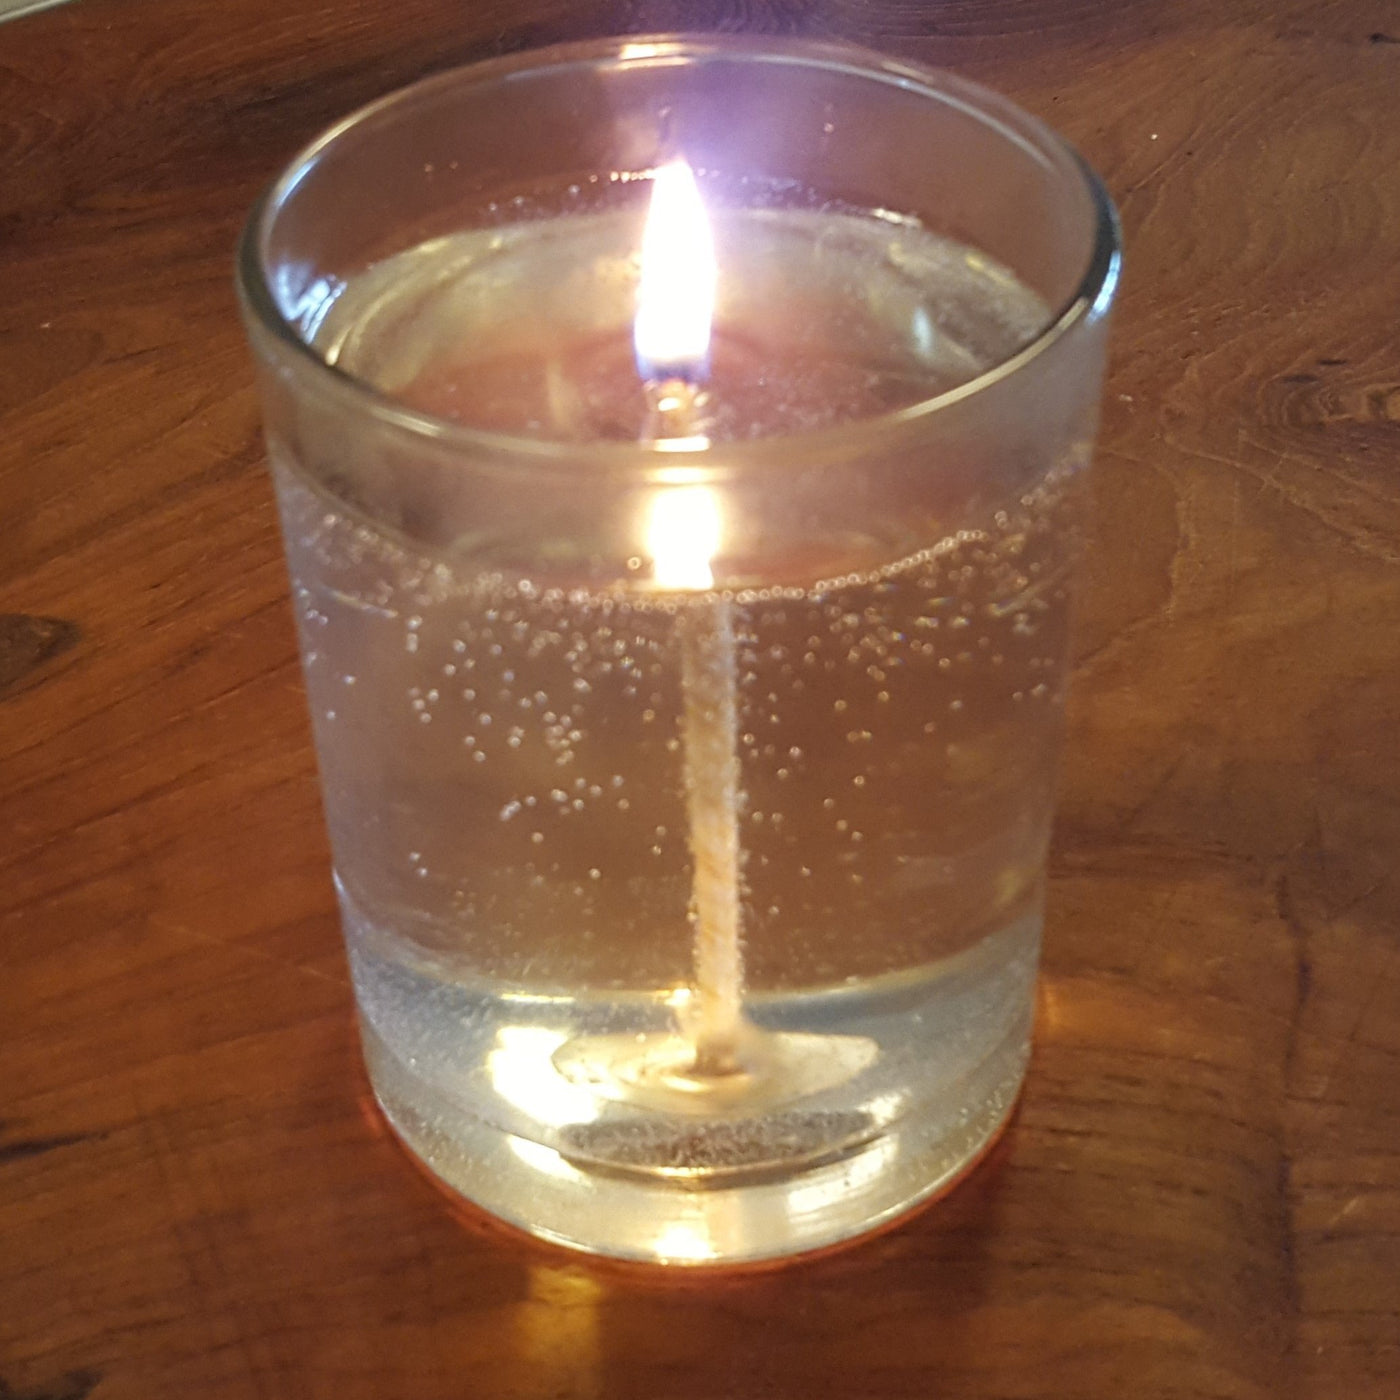 Working with Gel Wax safely - CandleMaking